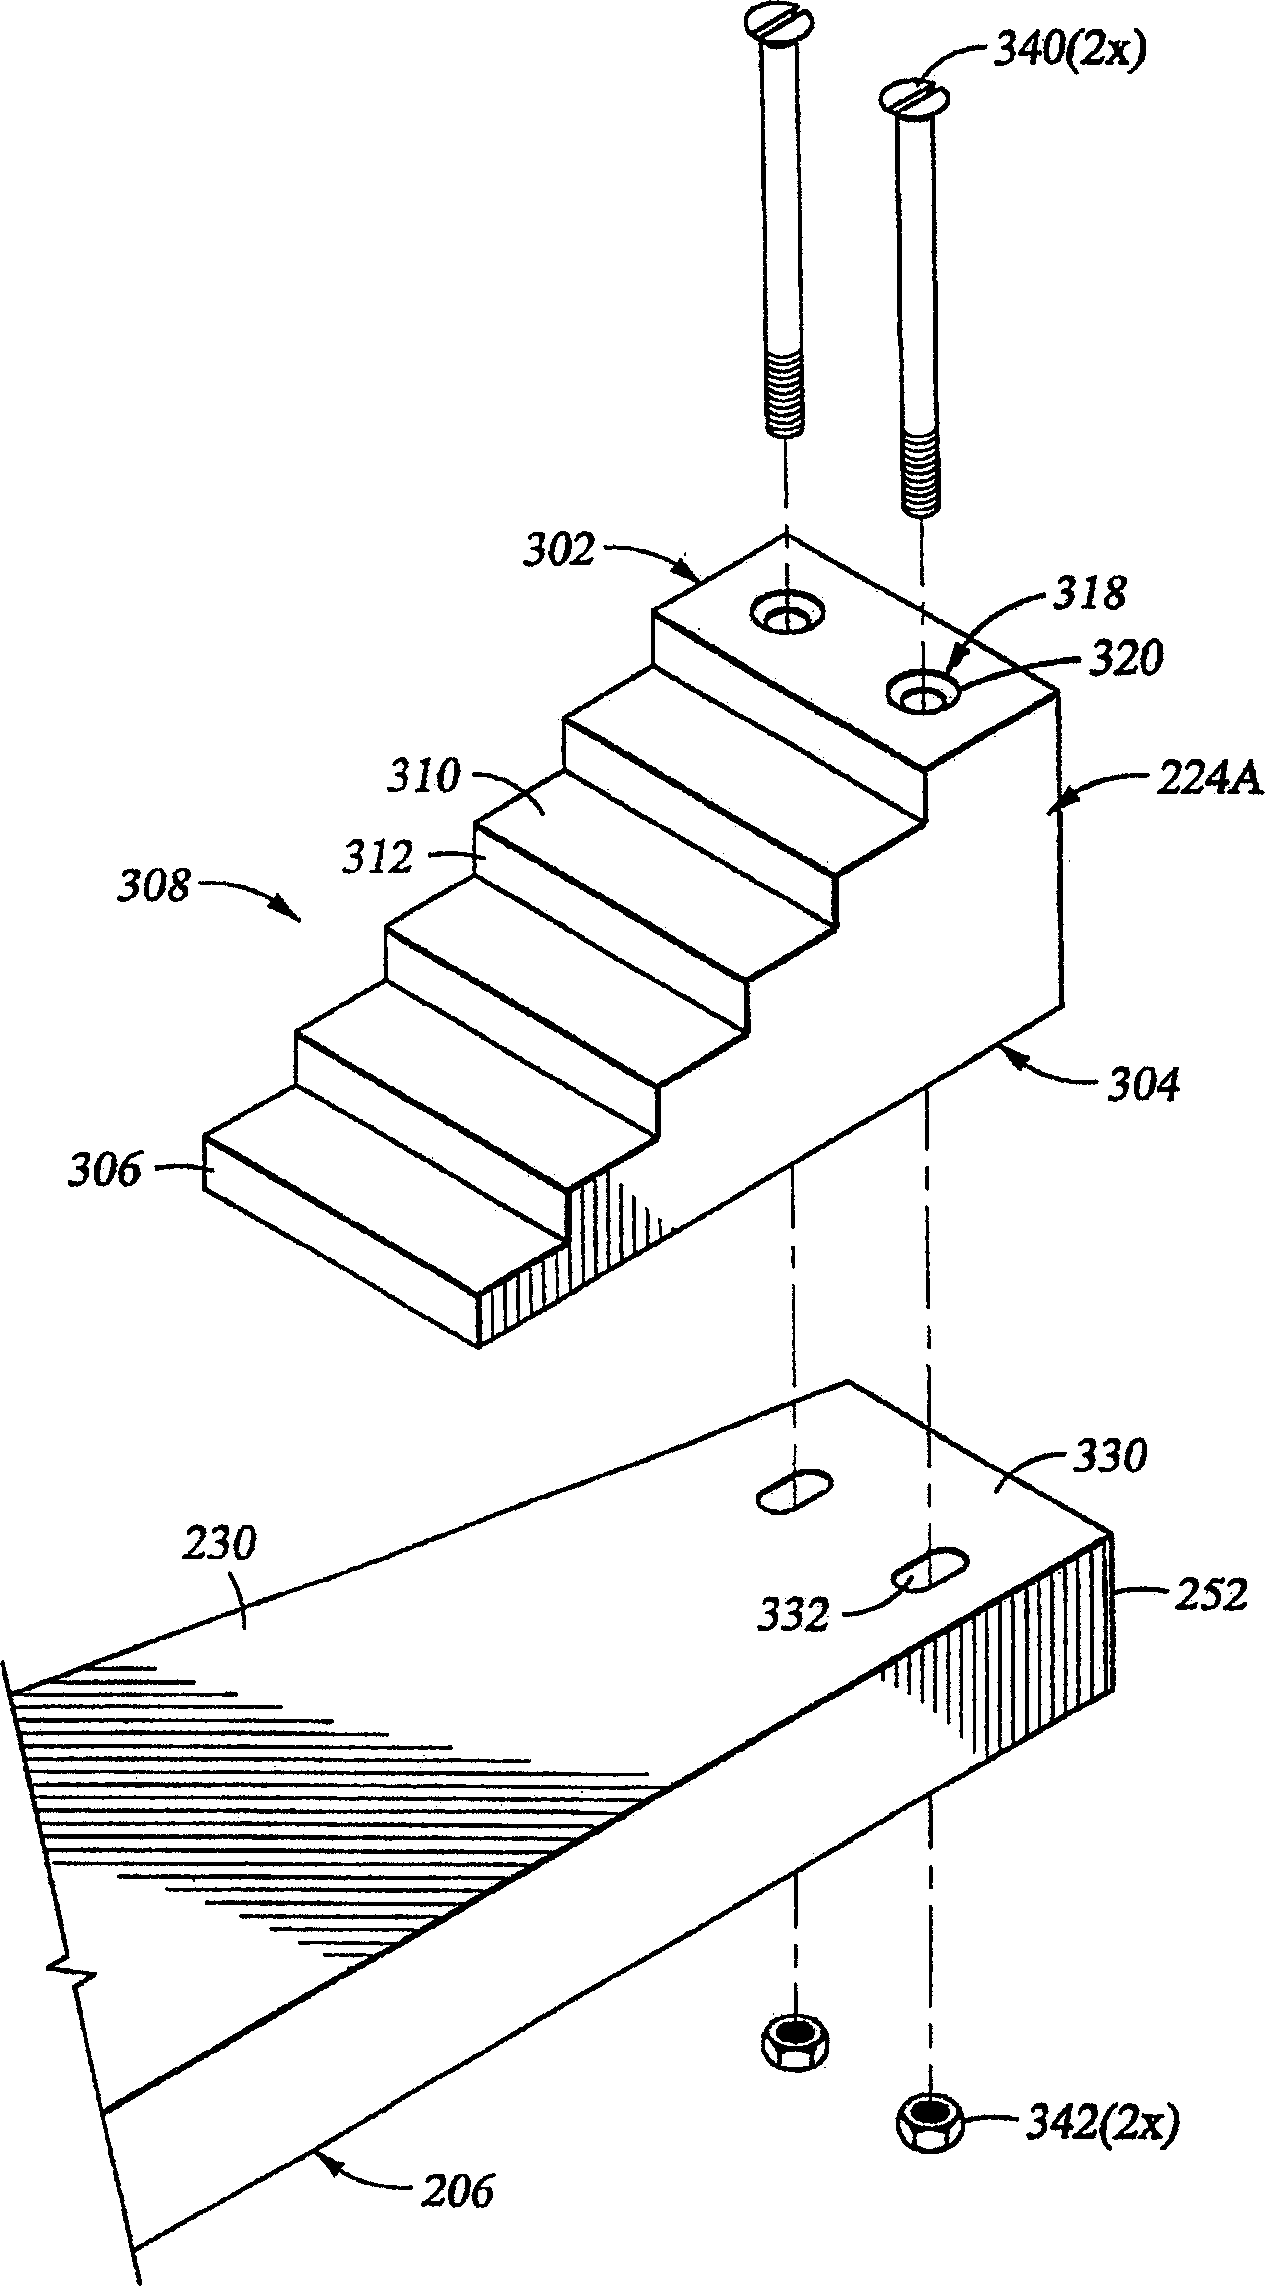 End effector assembly for supporting substrates